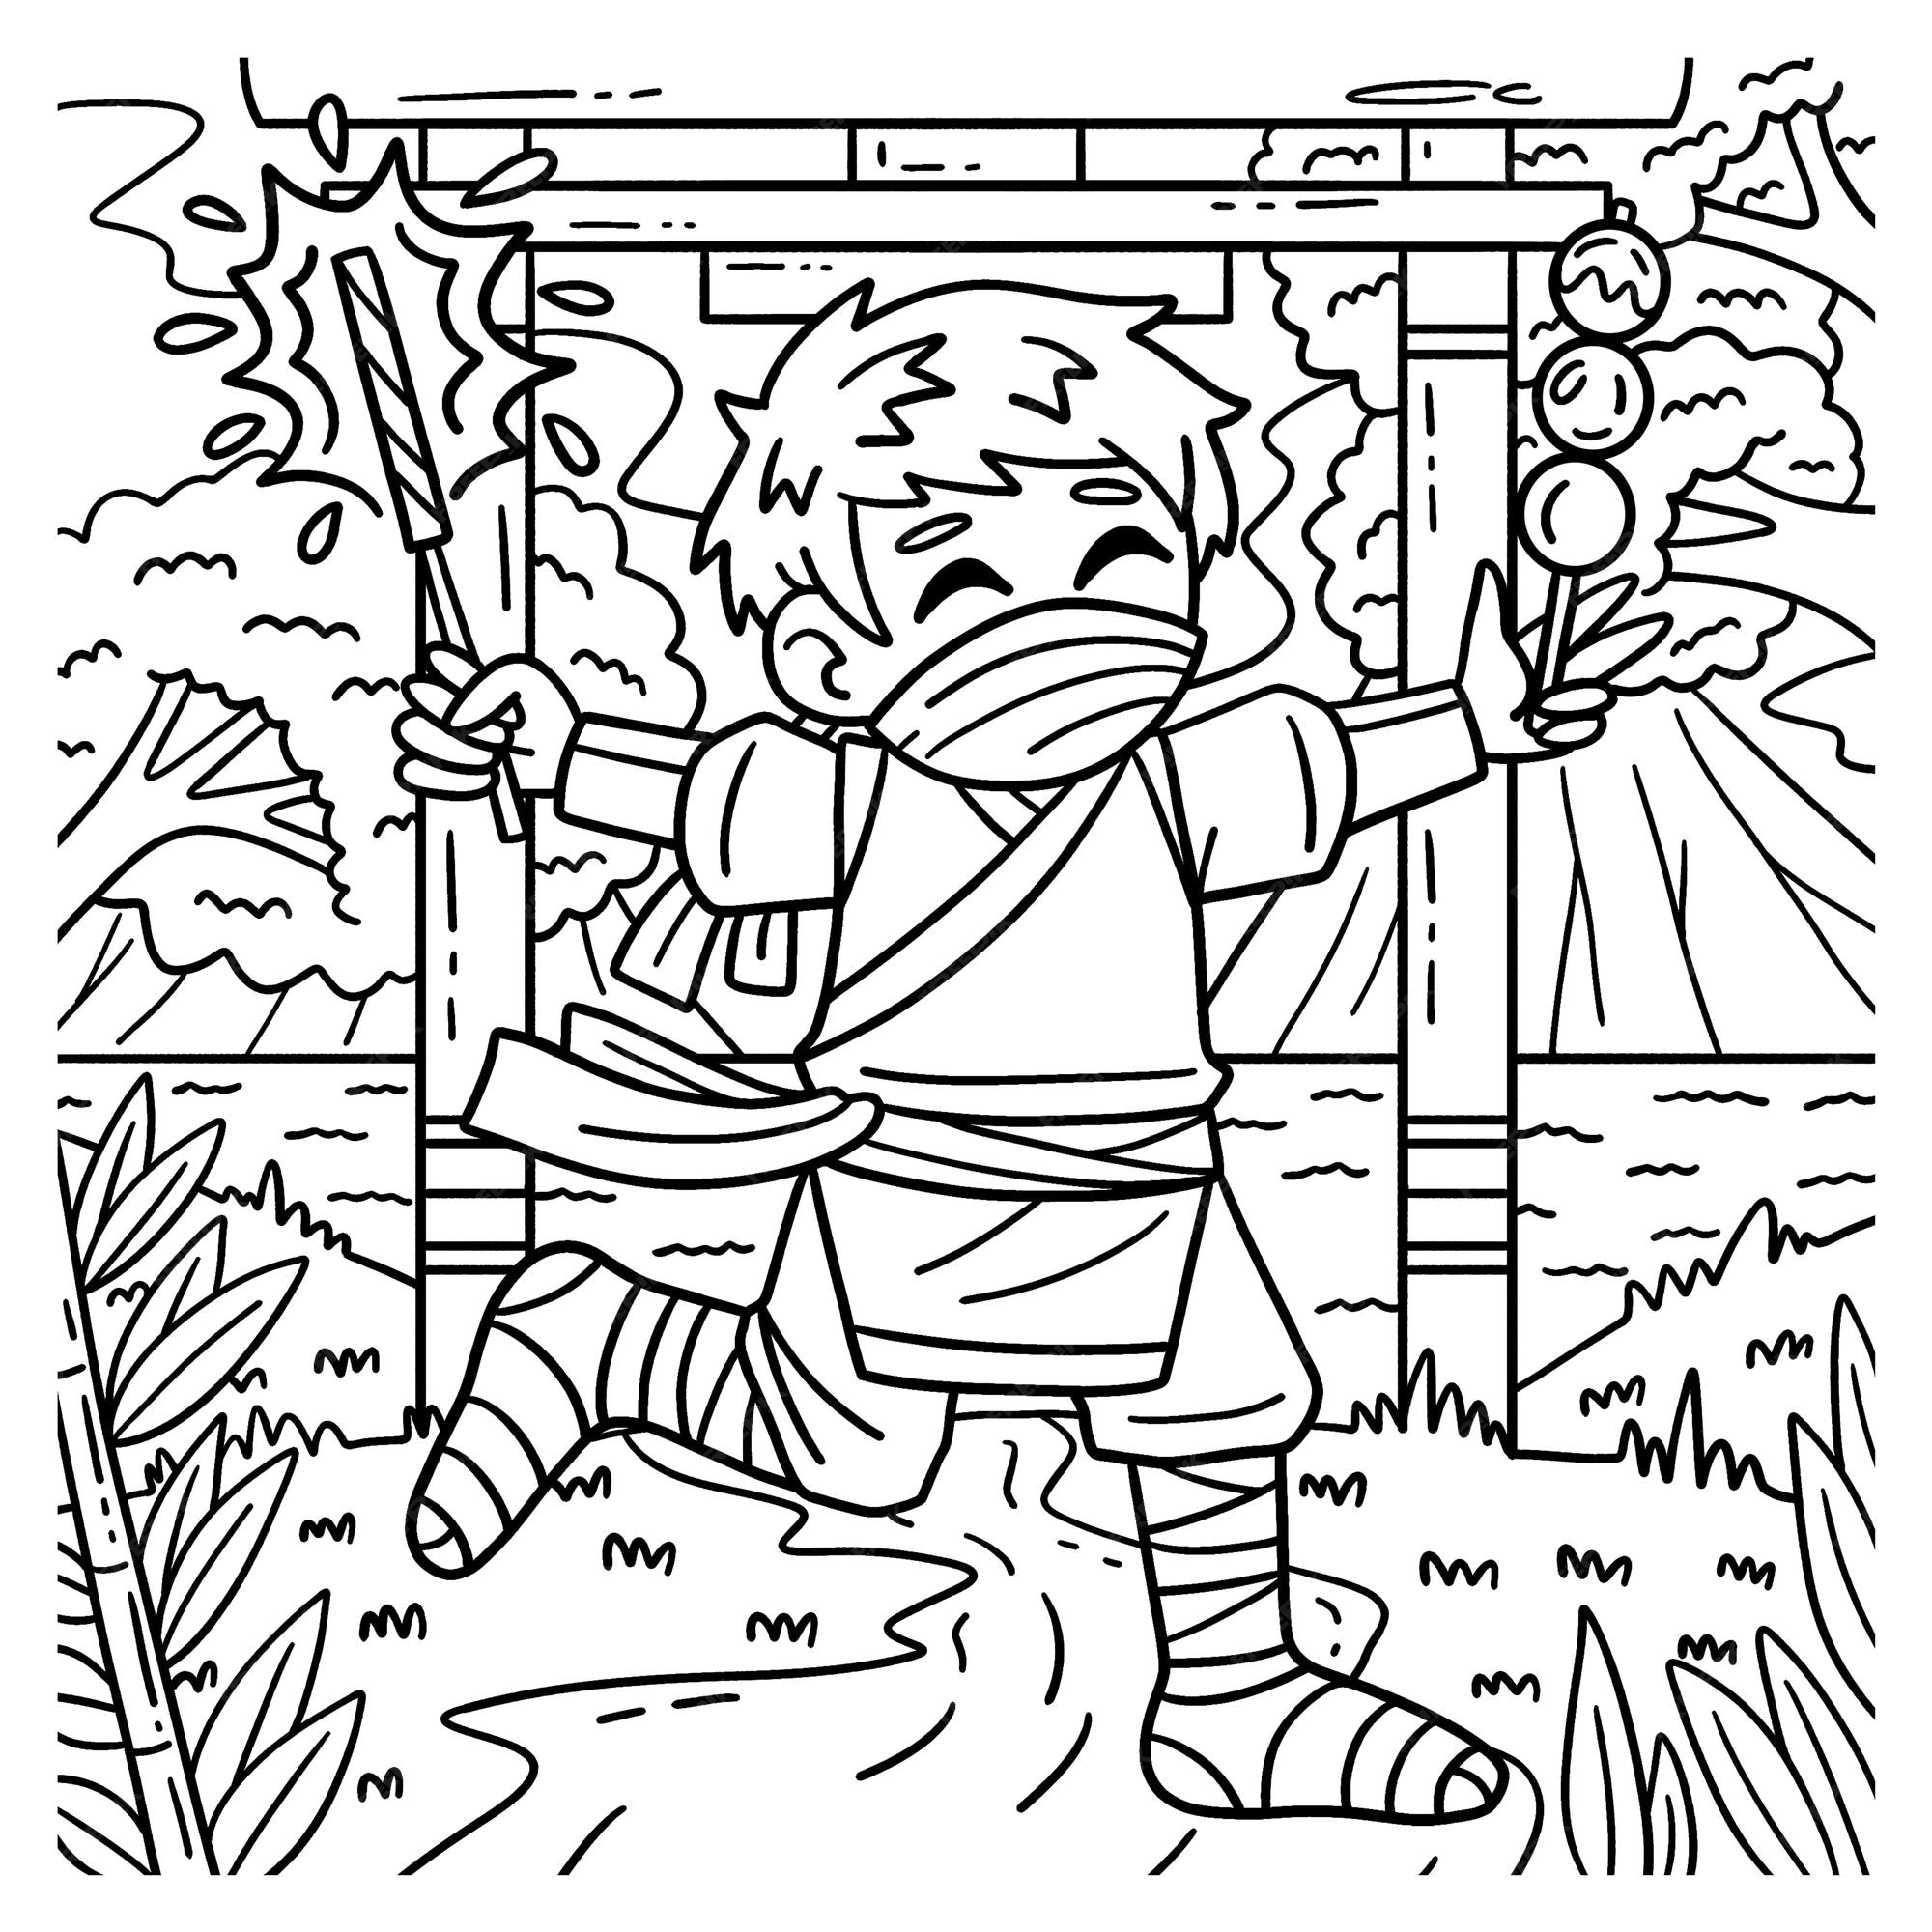 Premium vector a cute and funny coloring page of a ninja with sparklers and dango provides hours of coloring fun for children color this page is very easy suitable for little